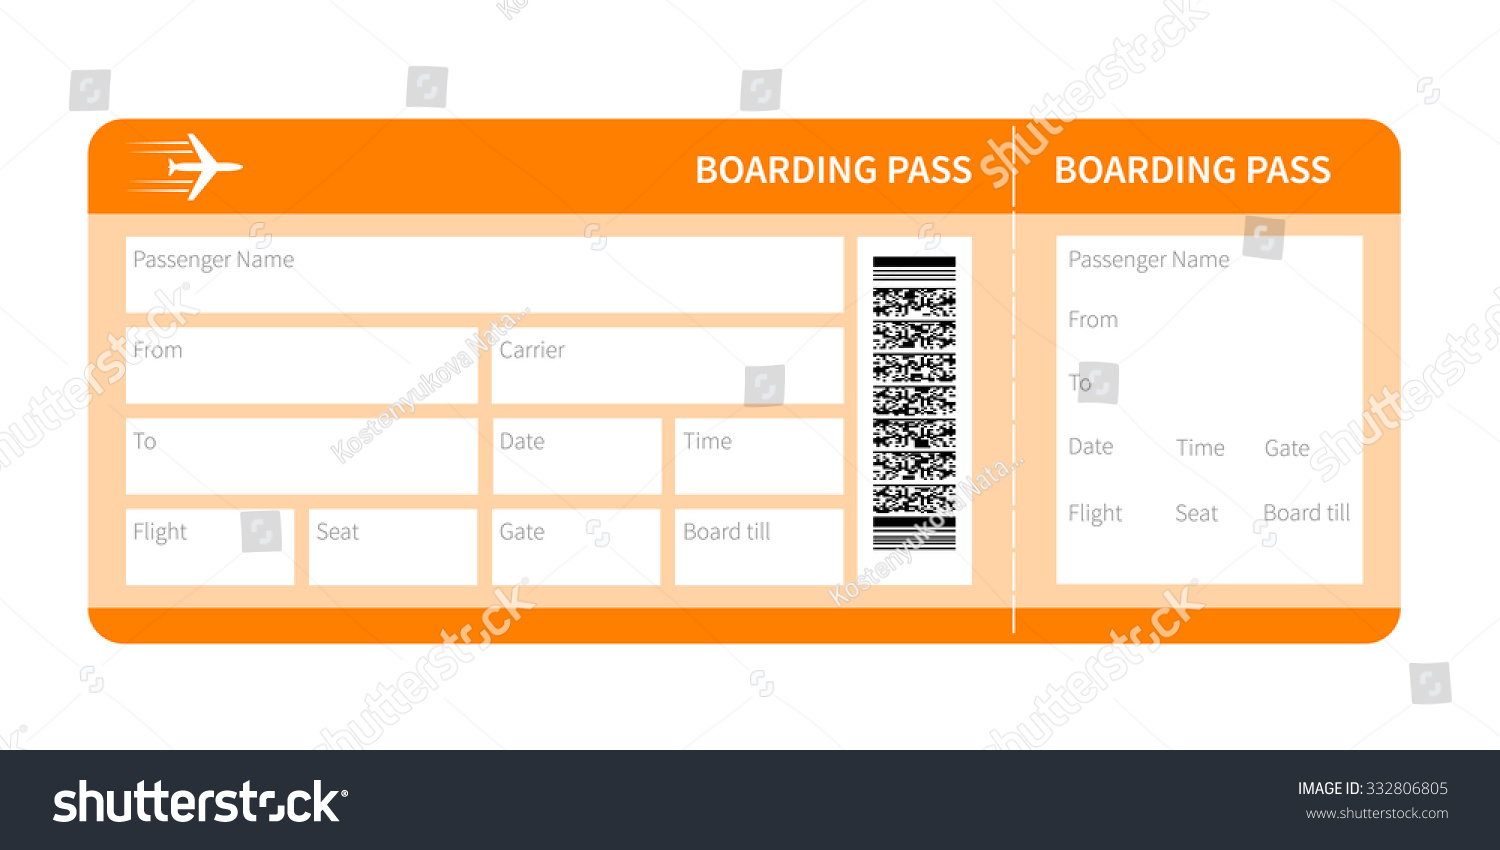 free clipart airplane ticket - photo #48